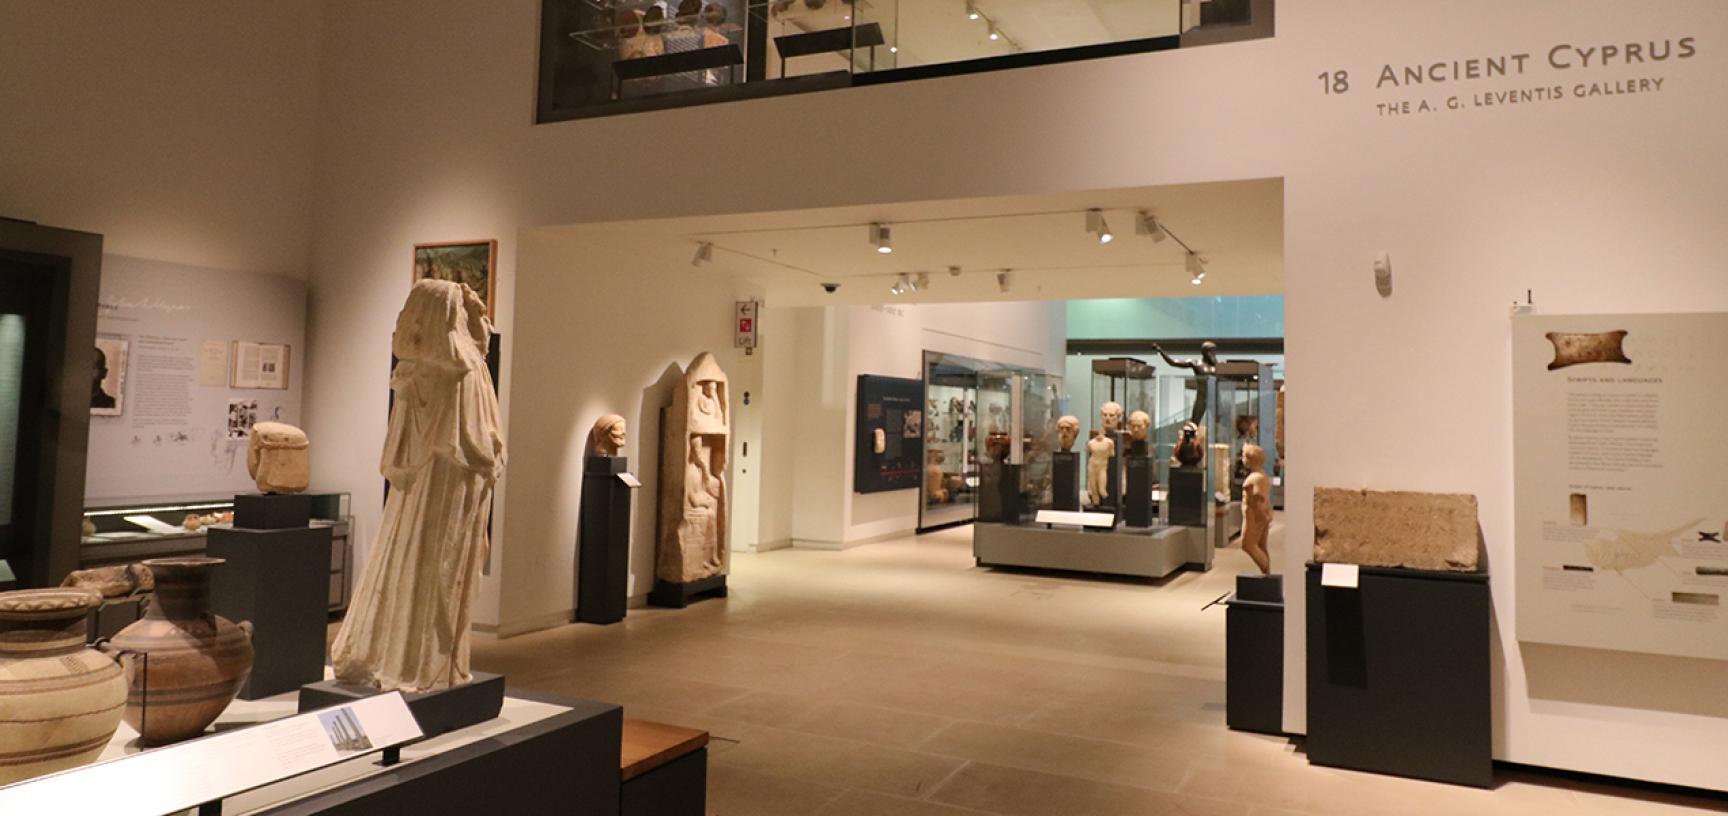  ANCIENT CYPRUS Gallery at the Ashmolean 